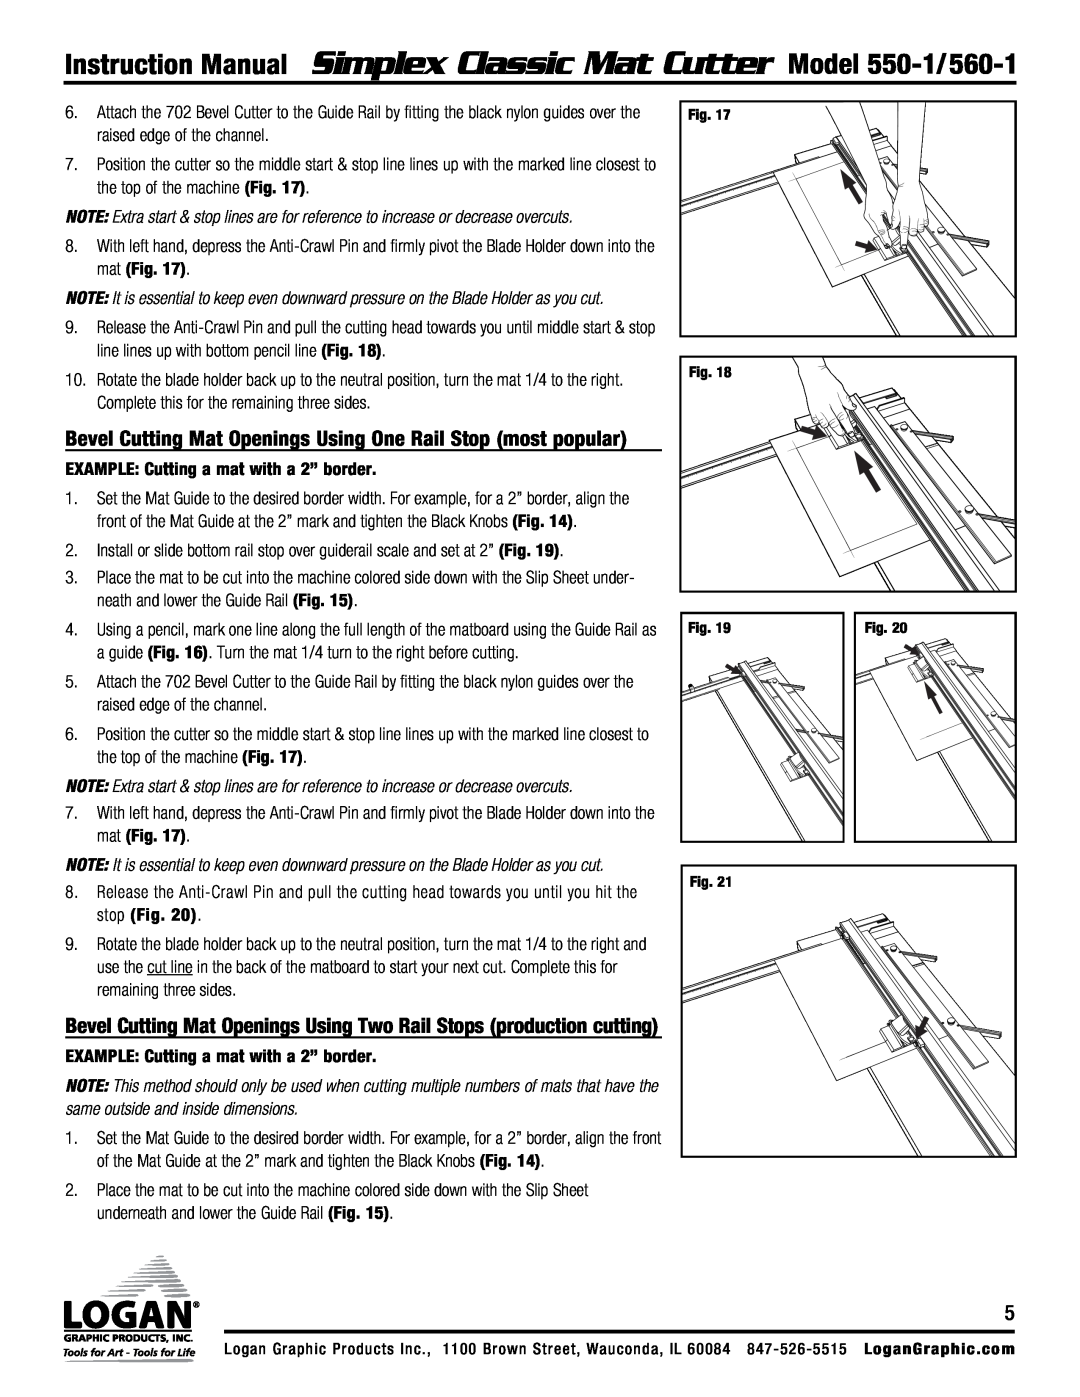 Logan Graphic Products 560-1, 550-1 instruction manual Bevel Cutting Mat Openings Using One Rail Stop most popular 